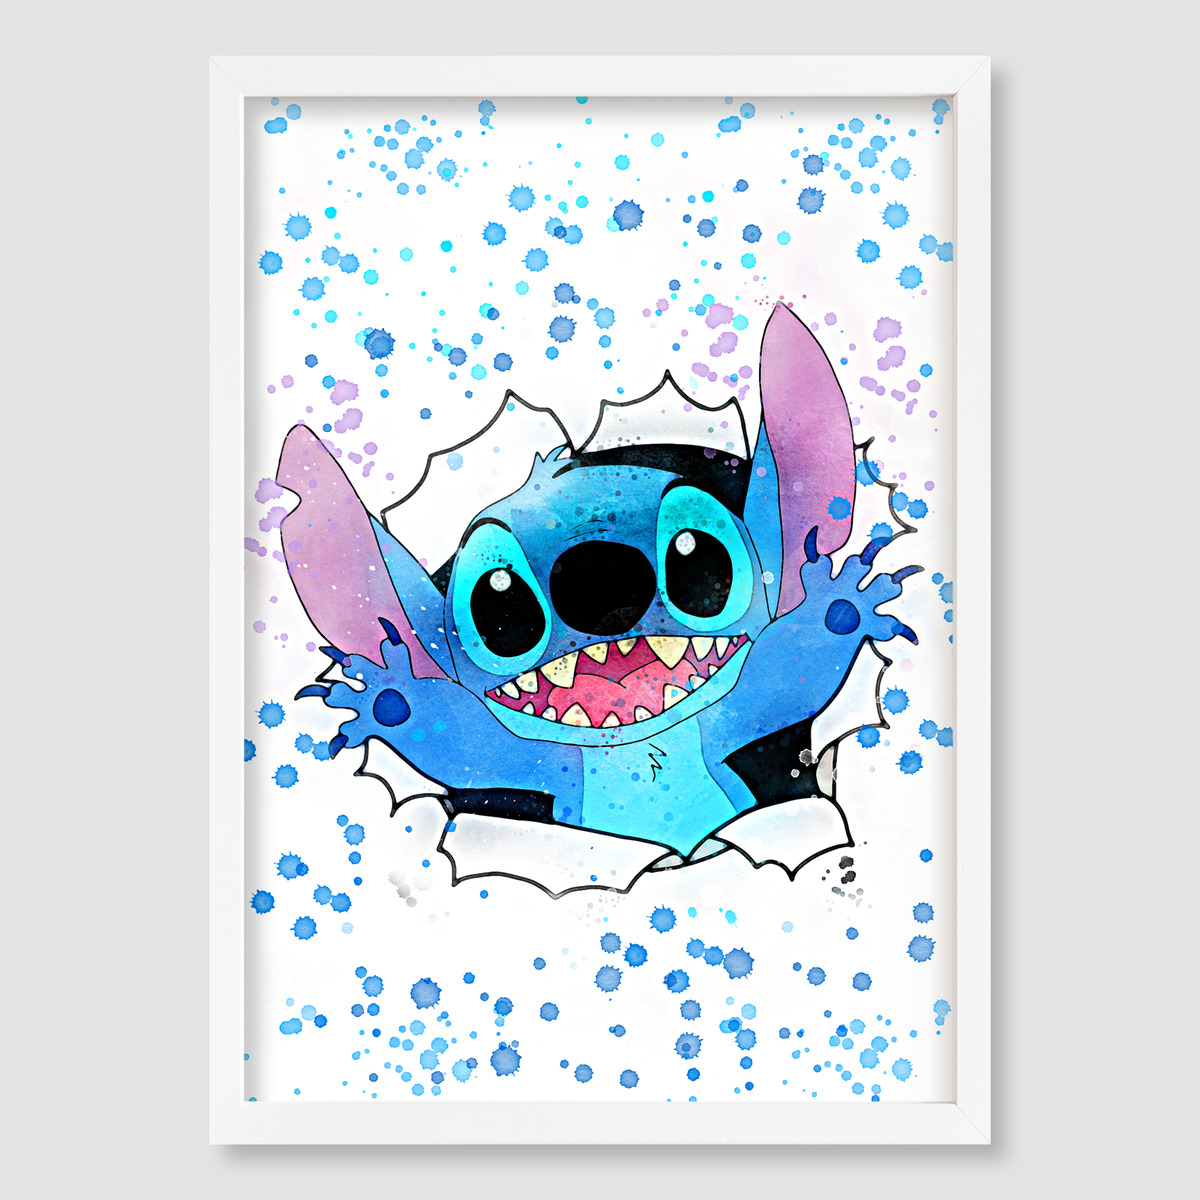 Water Colour Disney Lilo and Stitch Wall Art Print Poster Picture Kids